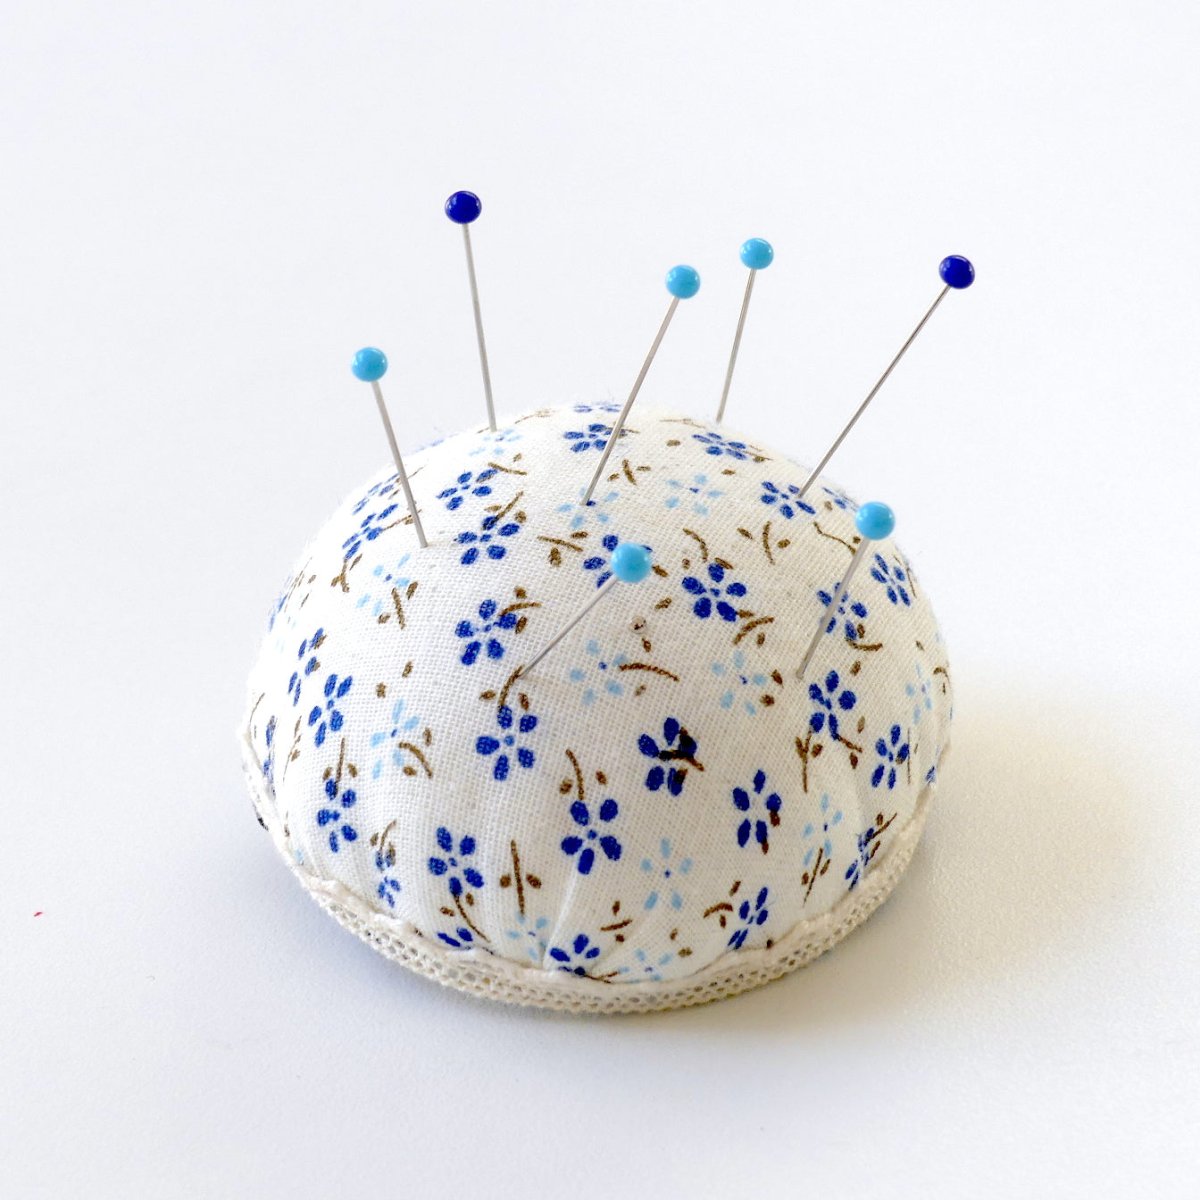 Glass Head Pins poked into a pin cushion.